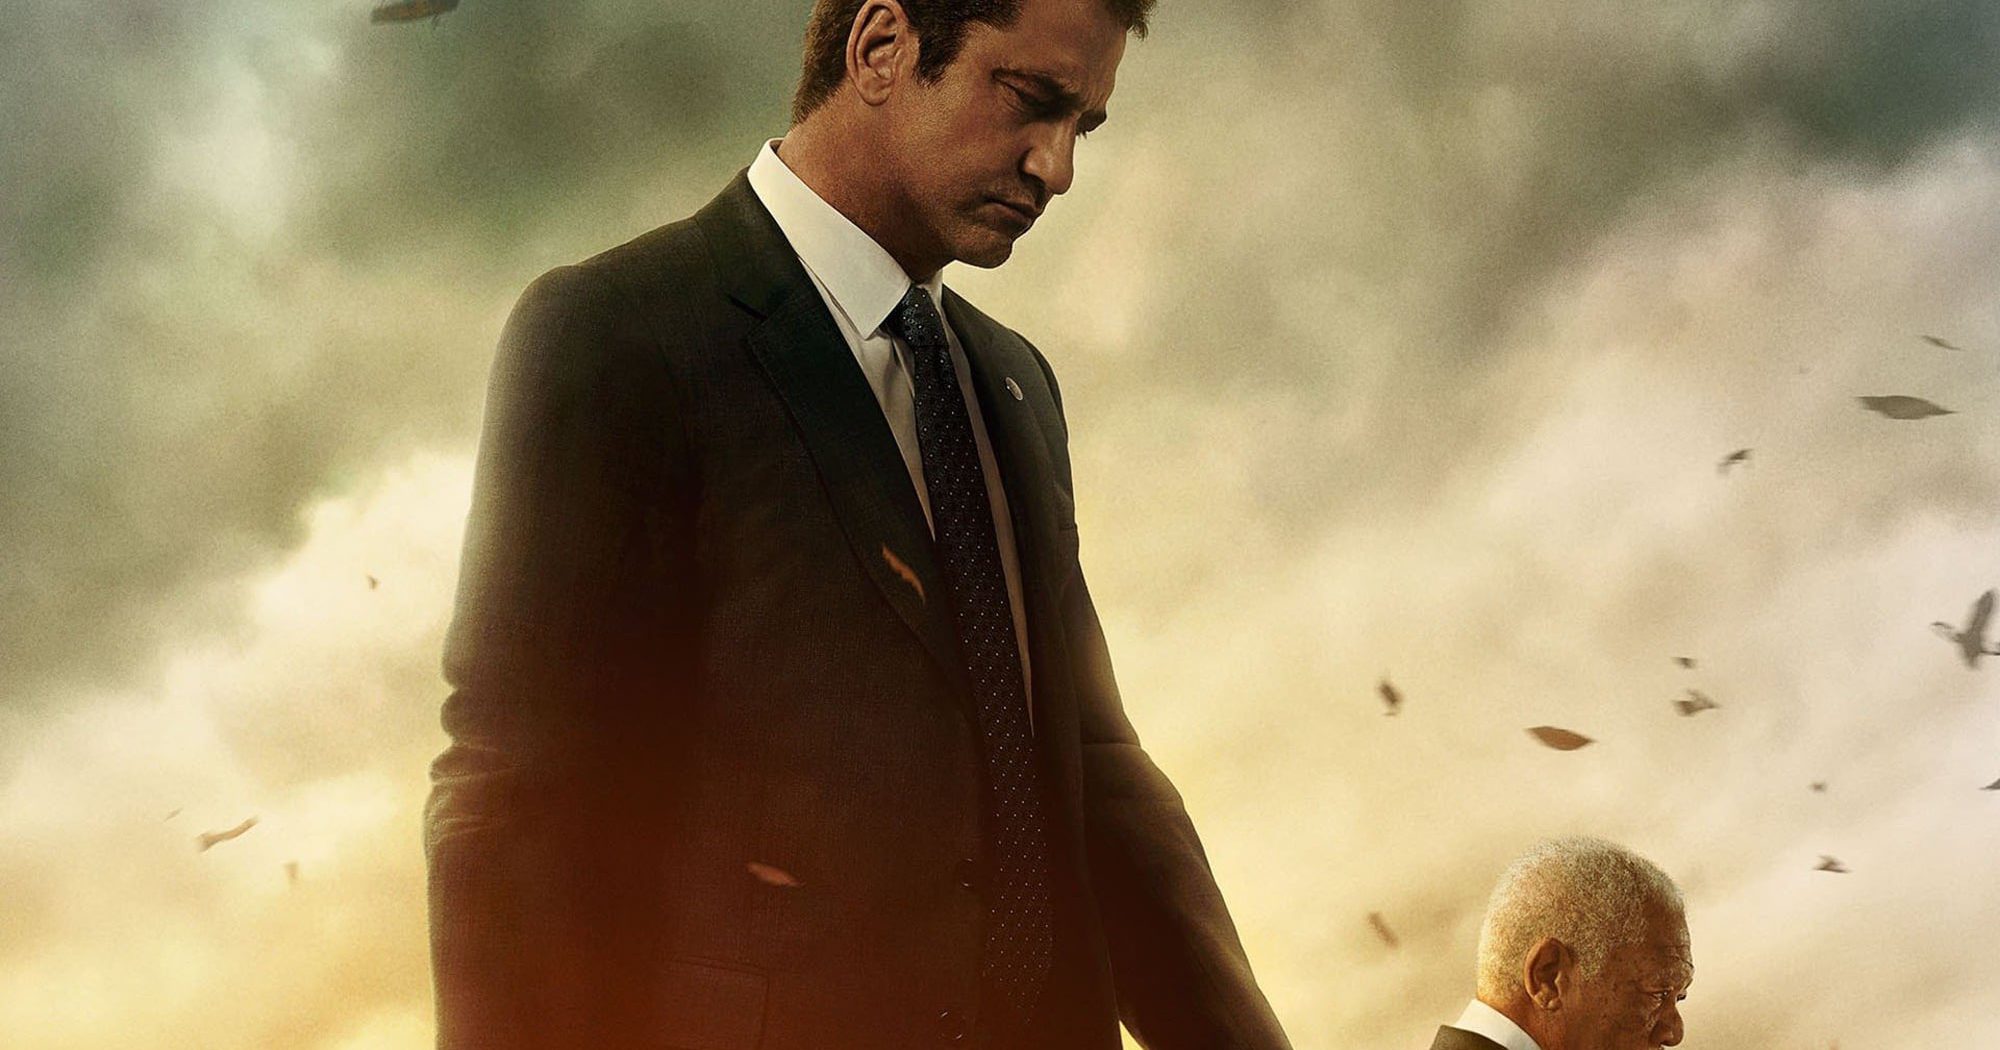 Poster for the movie "Angel Has Fallen"